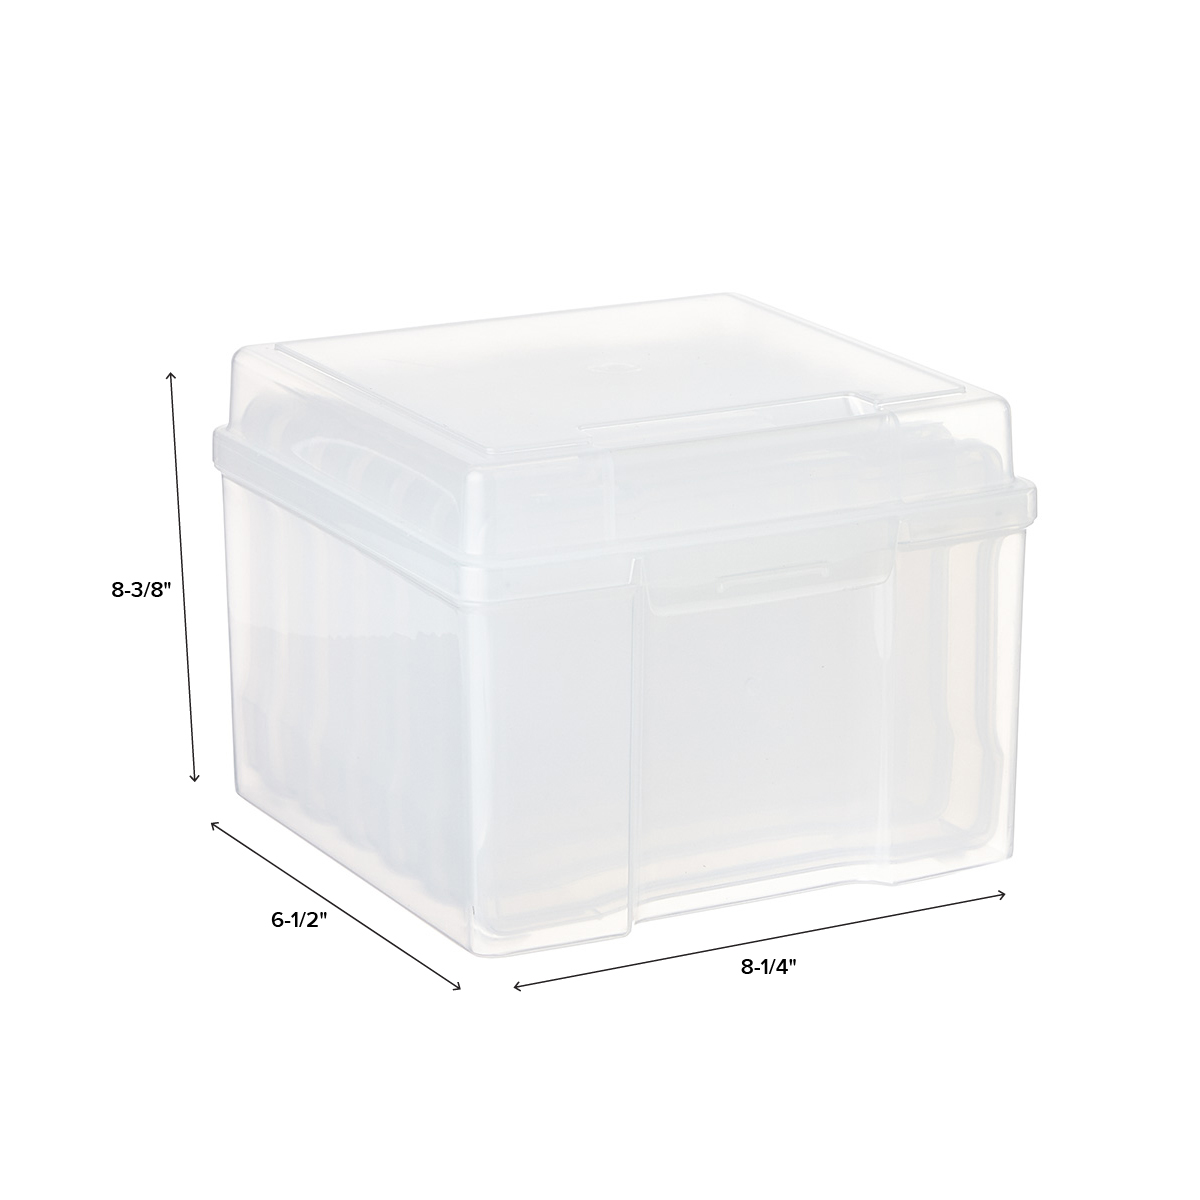 Photo Organizer Cases Photo Keeper Picture Storage Containers Box for Photos Clear 20 Pack Party Club of America Transparent 5 x 7 Photo Storage Boxes 